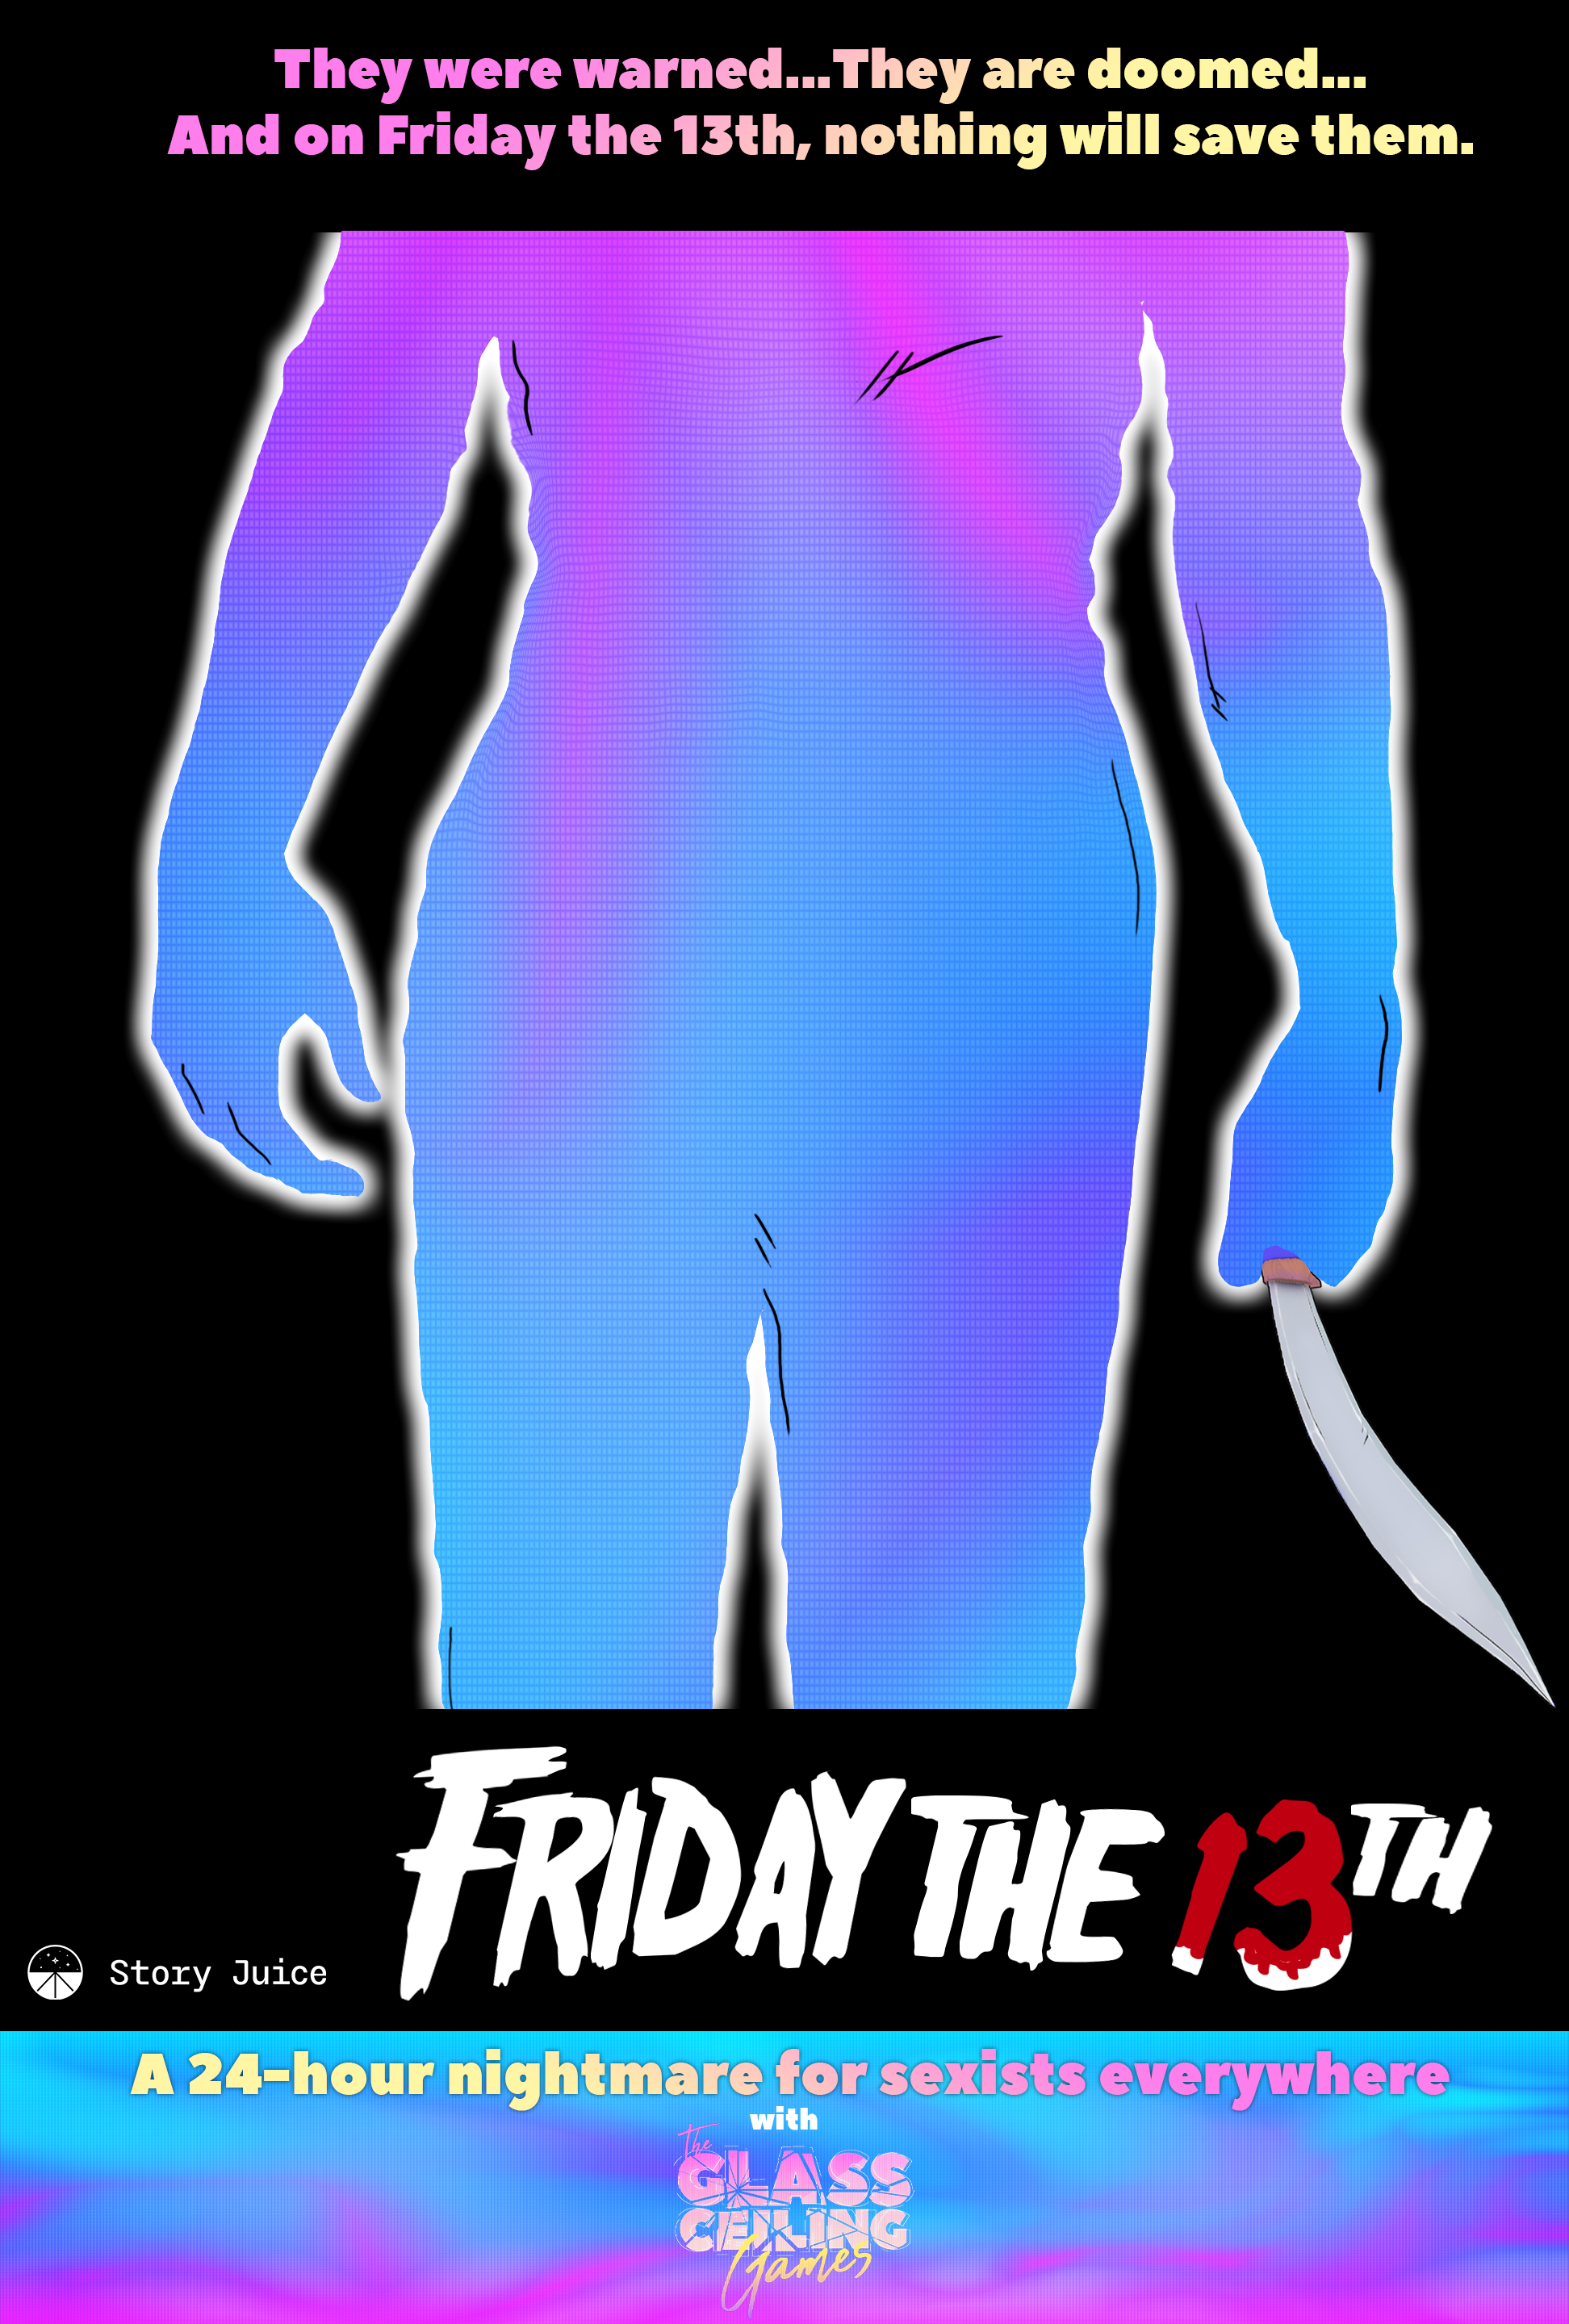 Friday 13th poster parody